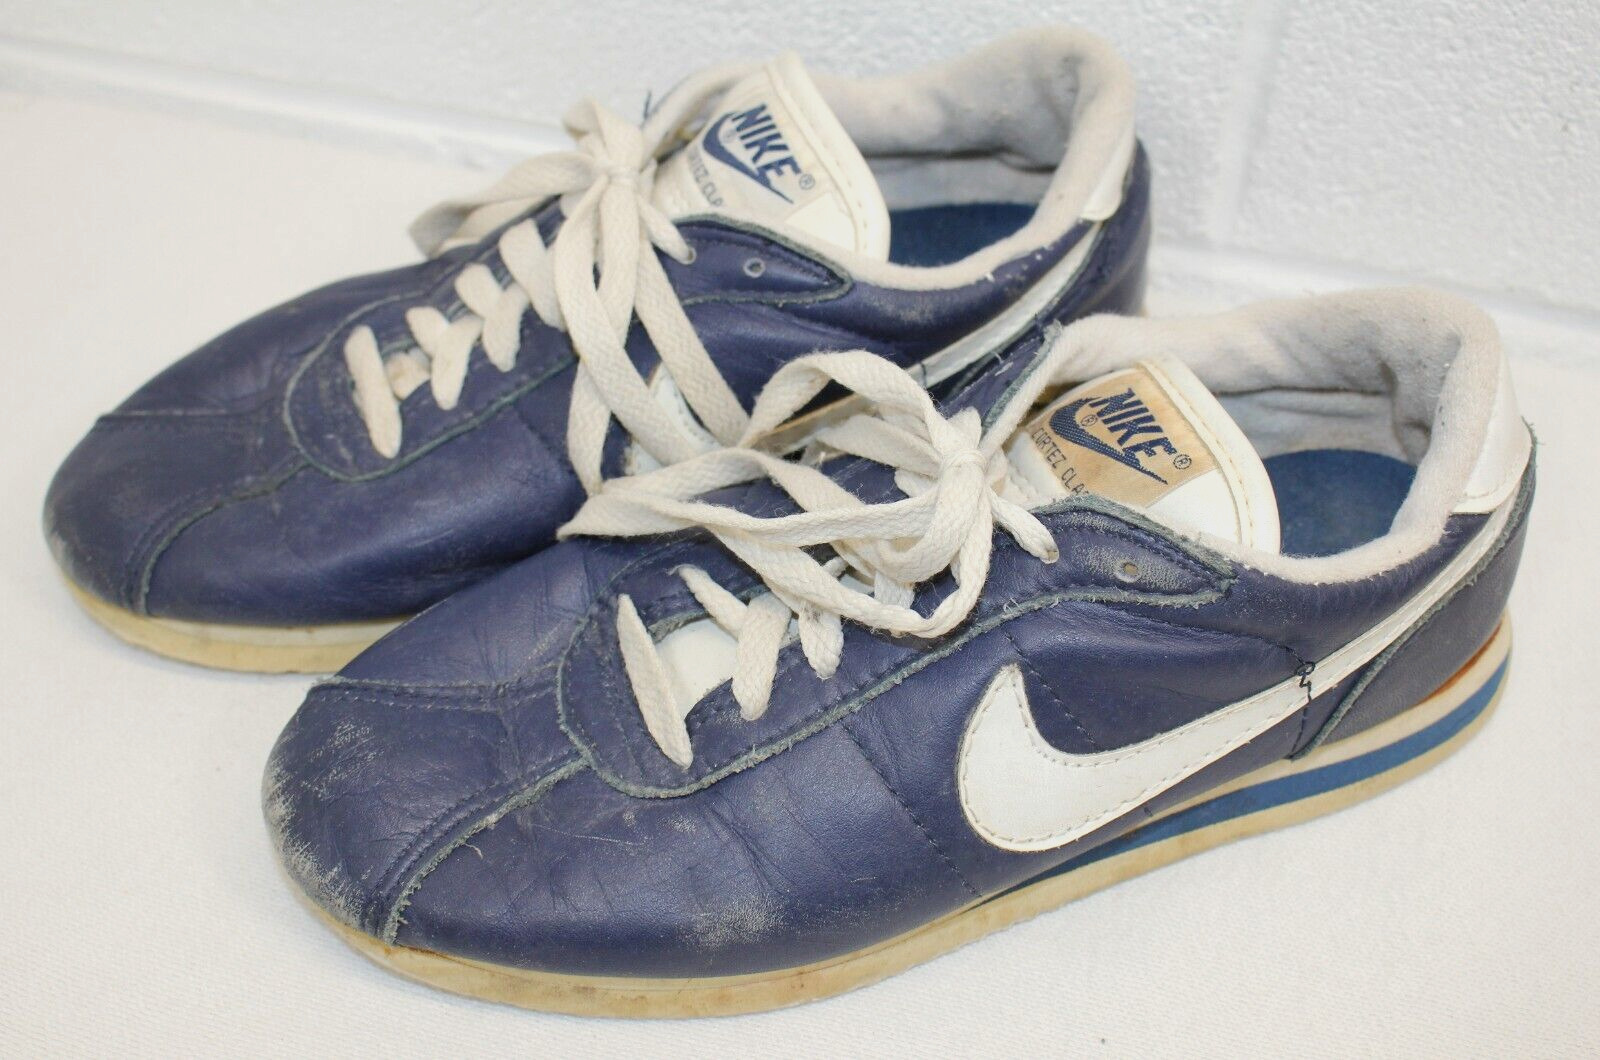 True Vintage Nike Classic Cortez Blue Leather Running Shoes Women's Size 7.5